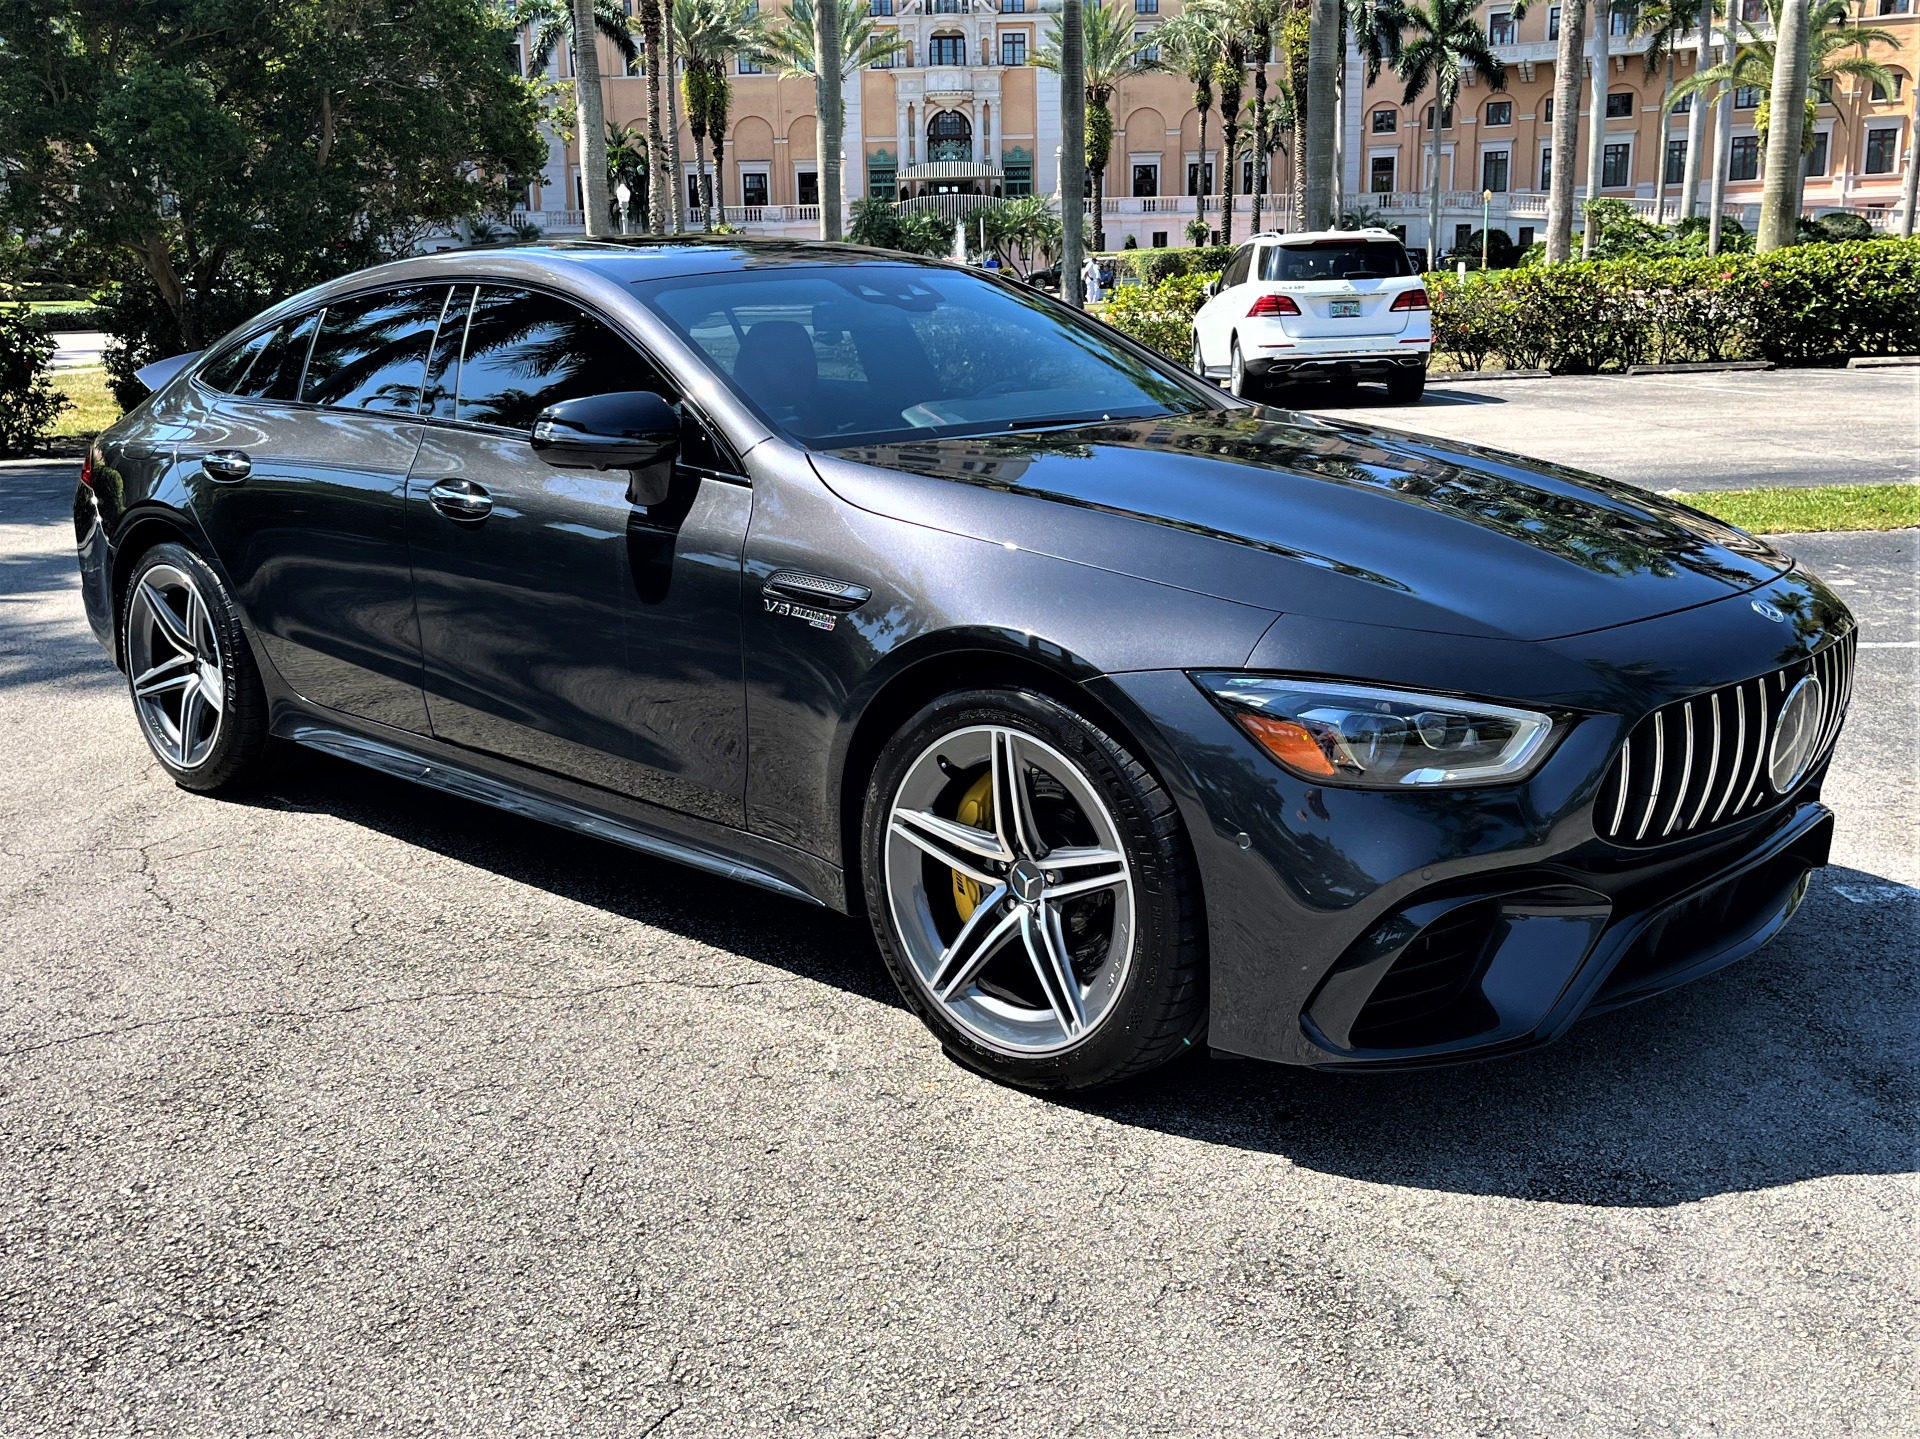 Used 2019 Mercedes-Benz AMG GT 63 S for sale $149,850 at The Gables Sports Cars in Miami FL 33146 2